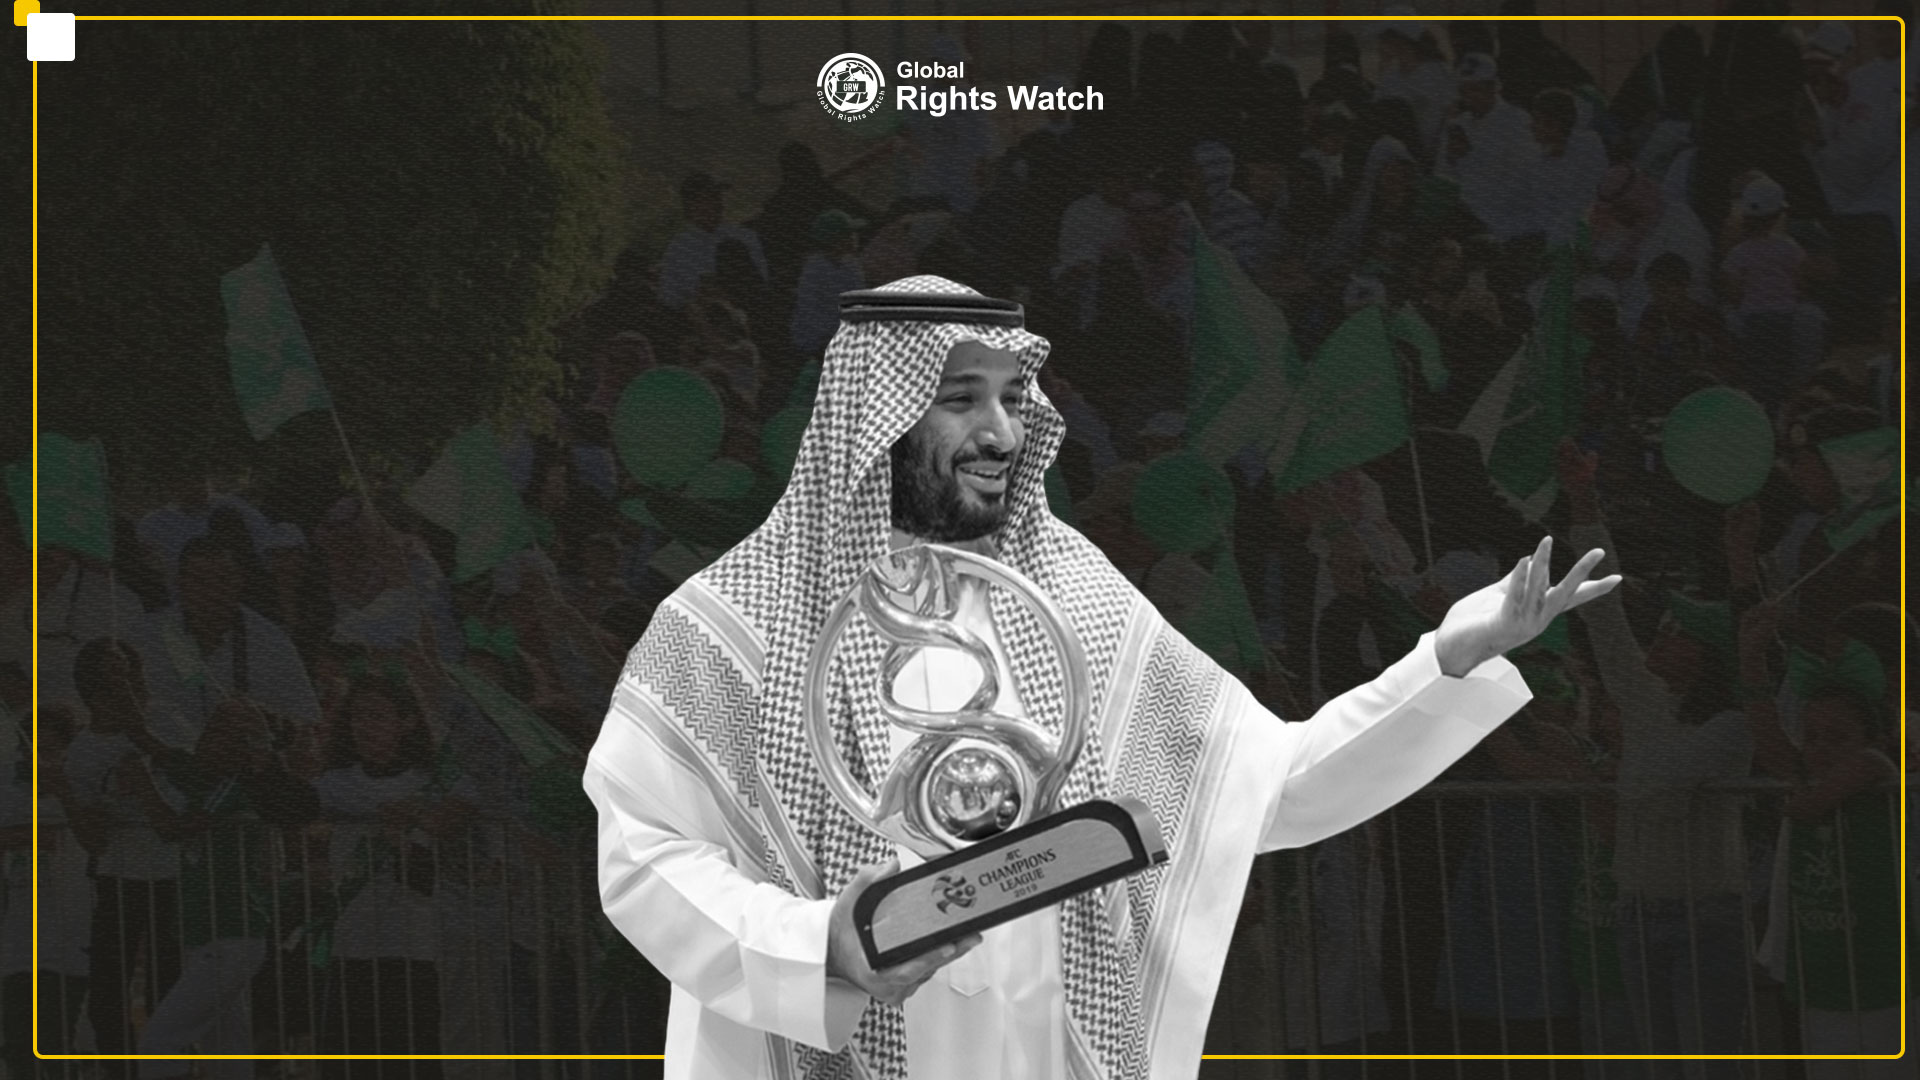 Saudi Arabia uses sport and political events to cover up its human rights violations